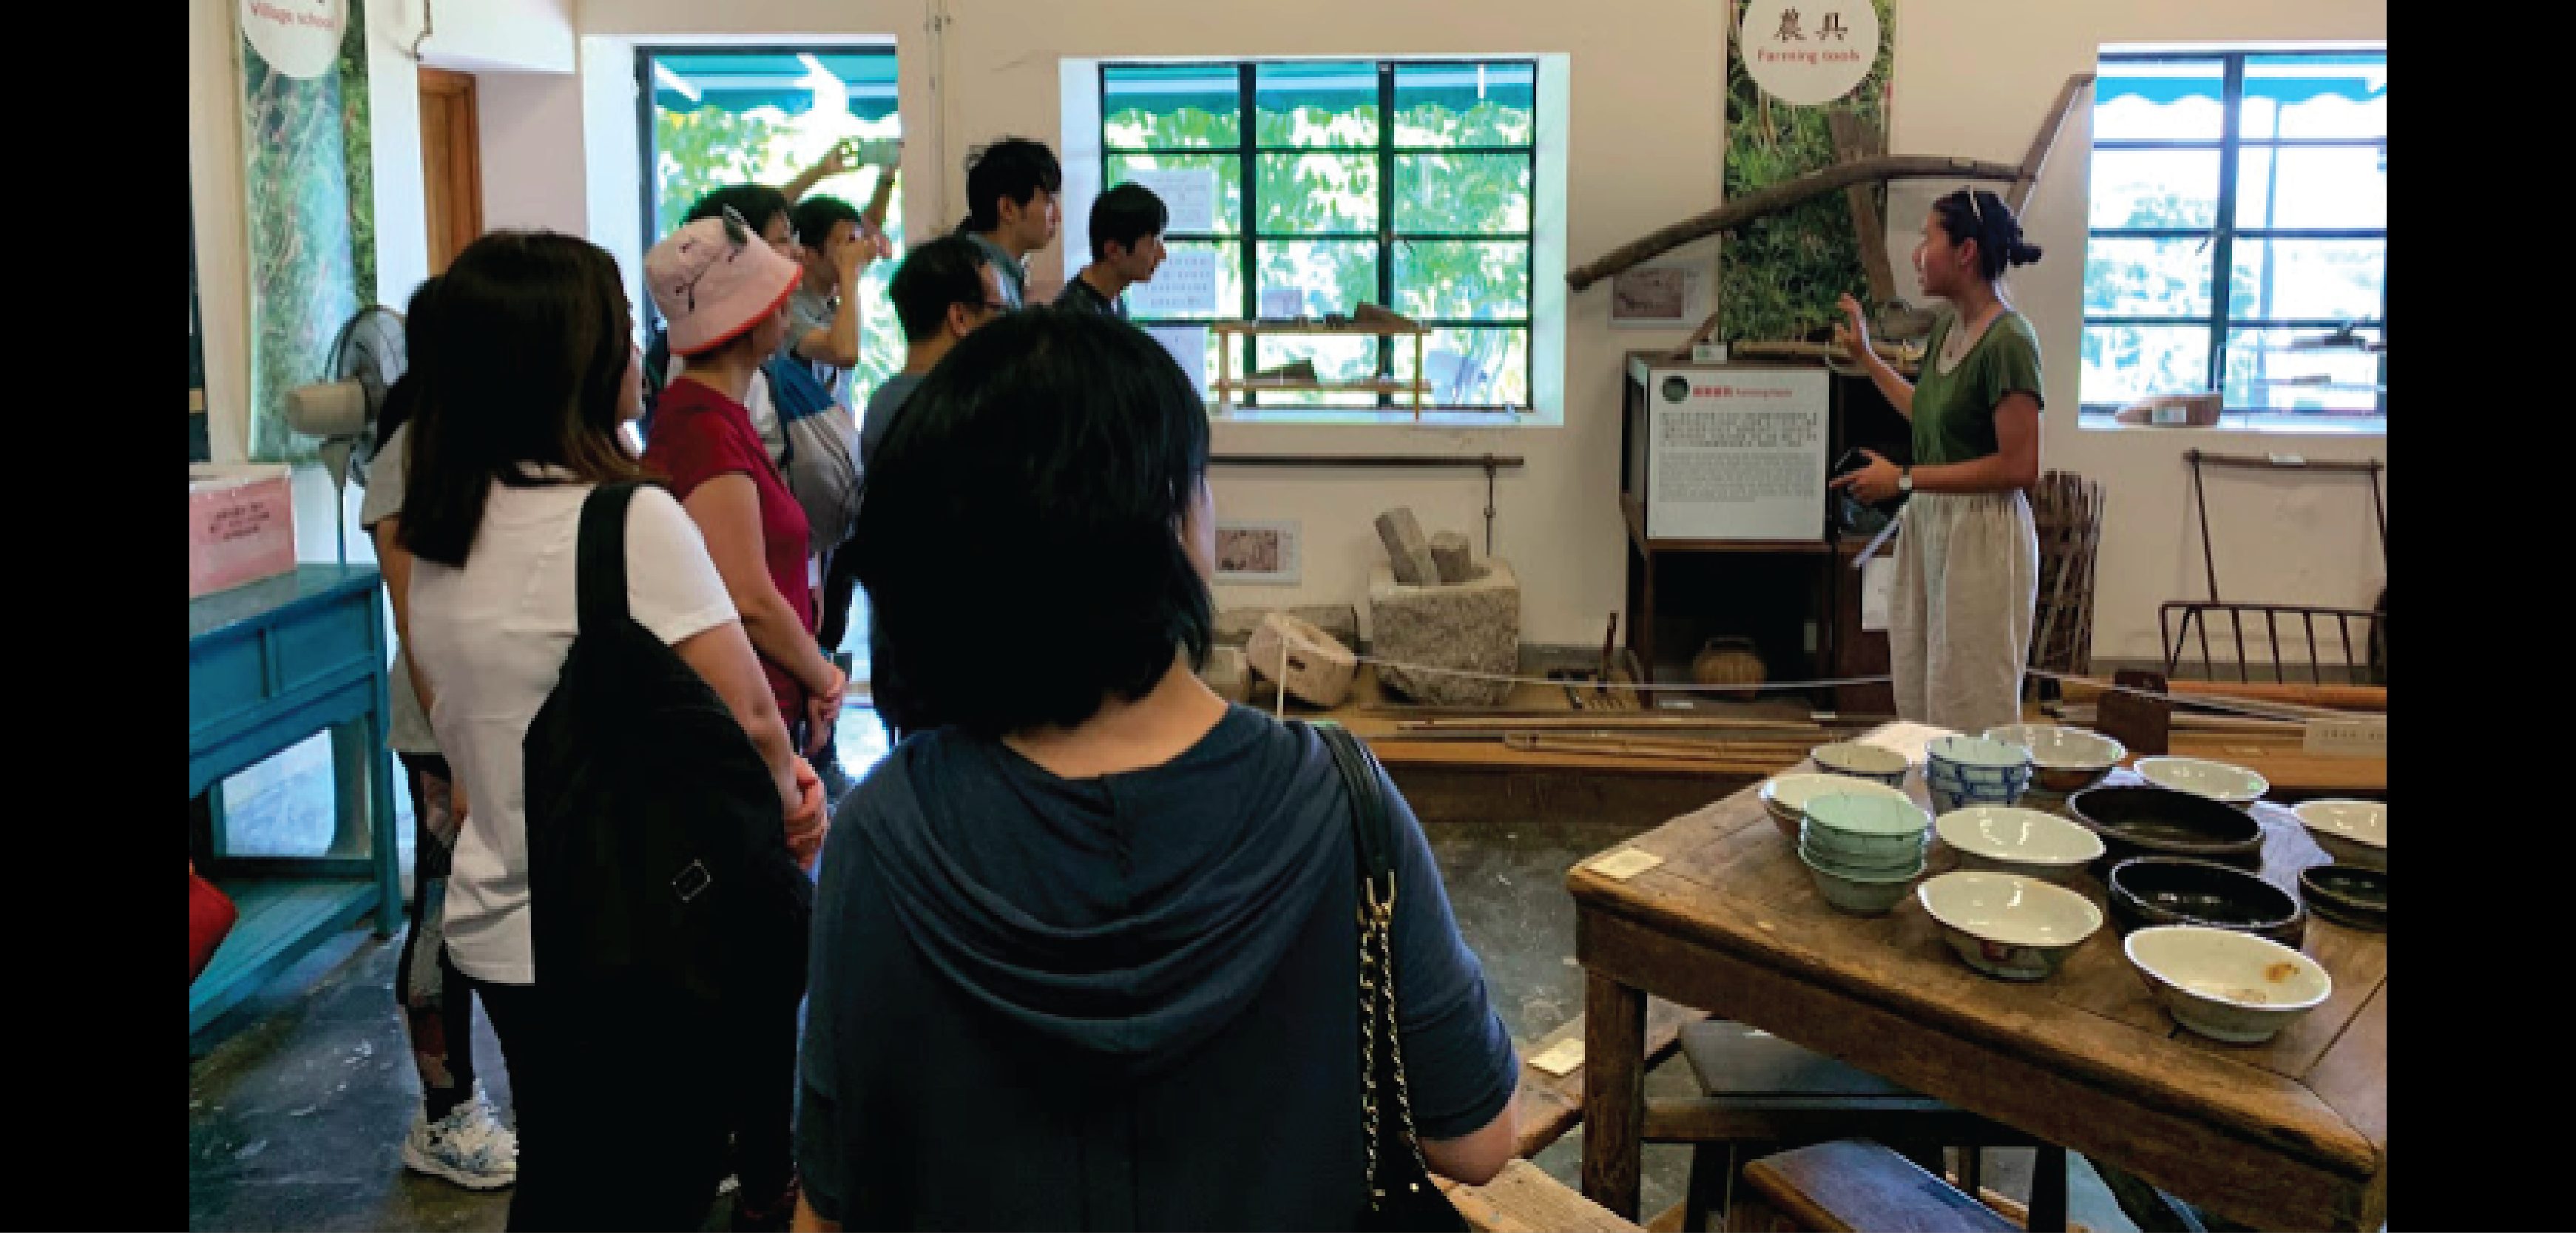 Chloe Wong providing a heritage tour at Yim Tin Tsai as part of her Community and Cultural Identity course